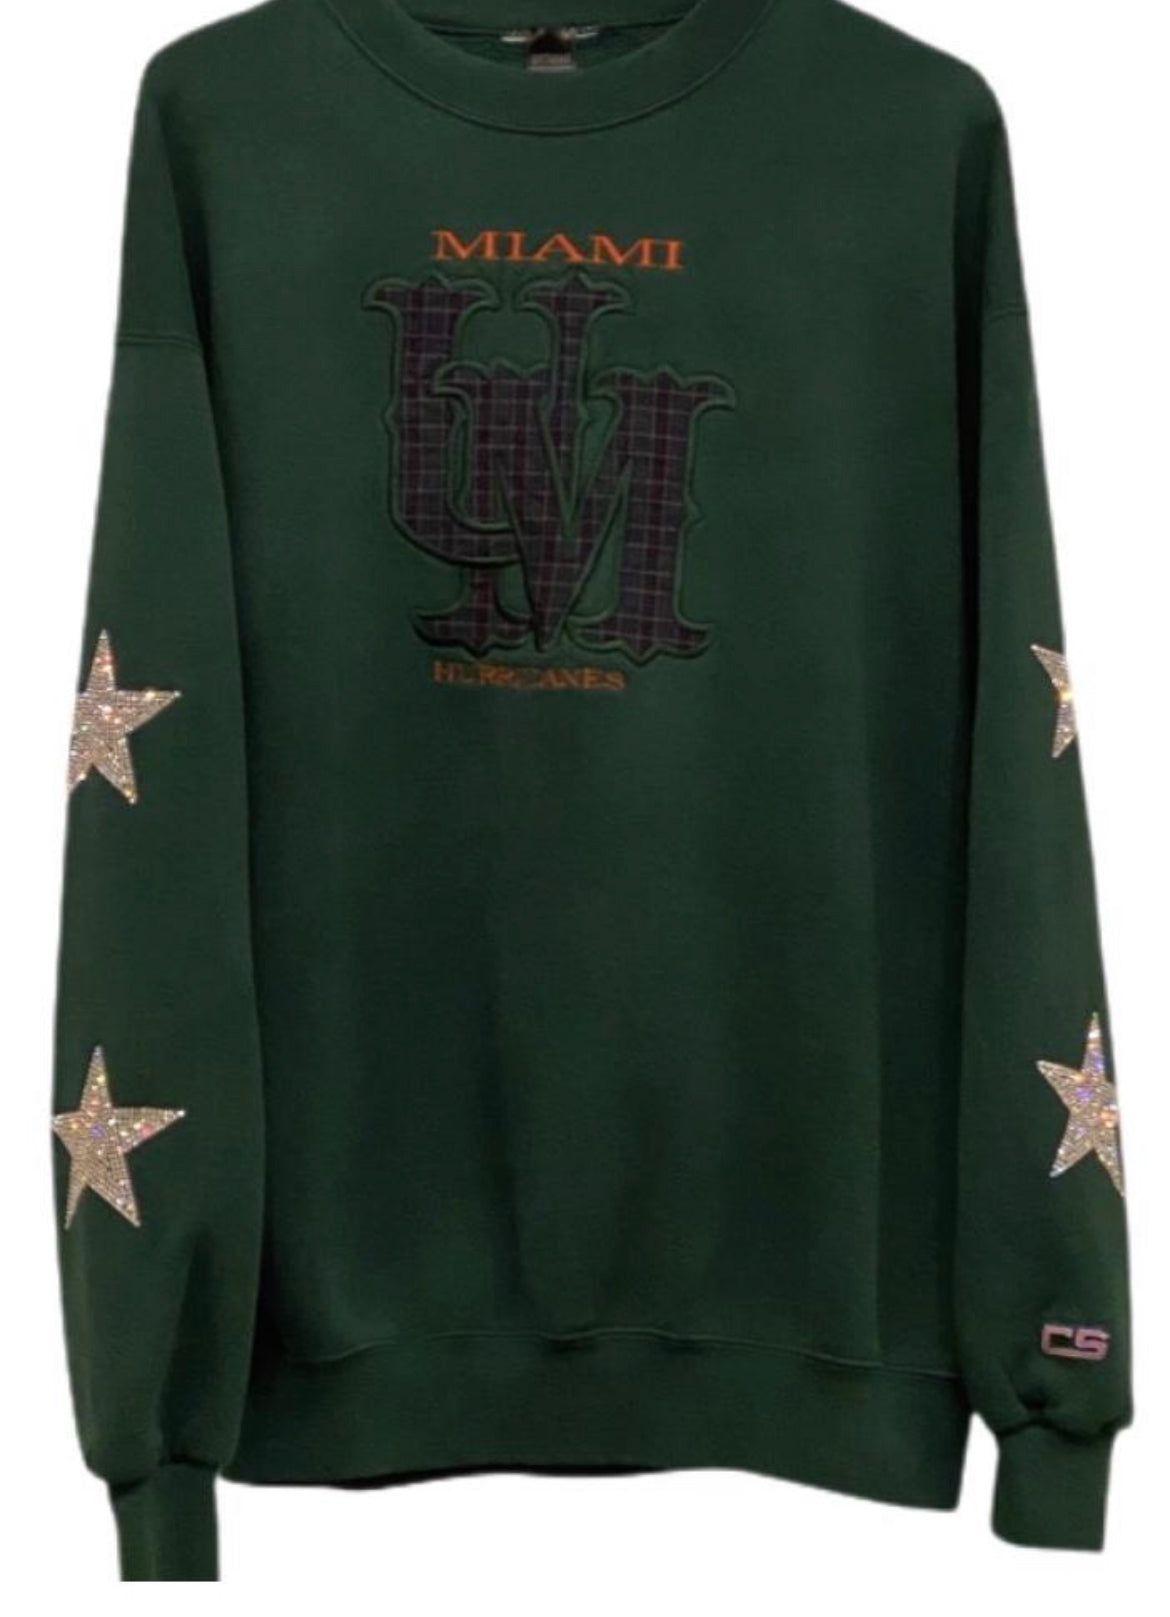 University of Miami, One of a KIND Vintage Miami Hurricanes Sweatshirt with  Crystal Star Design